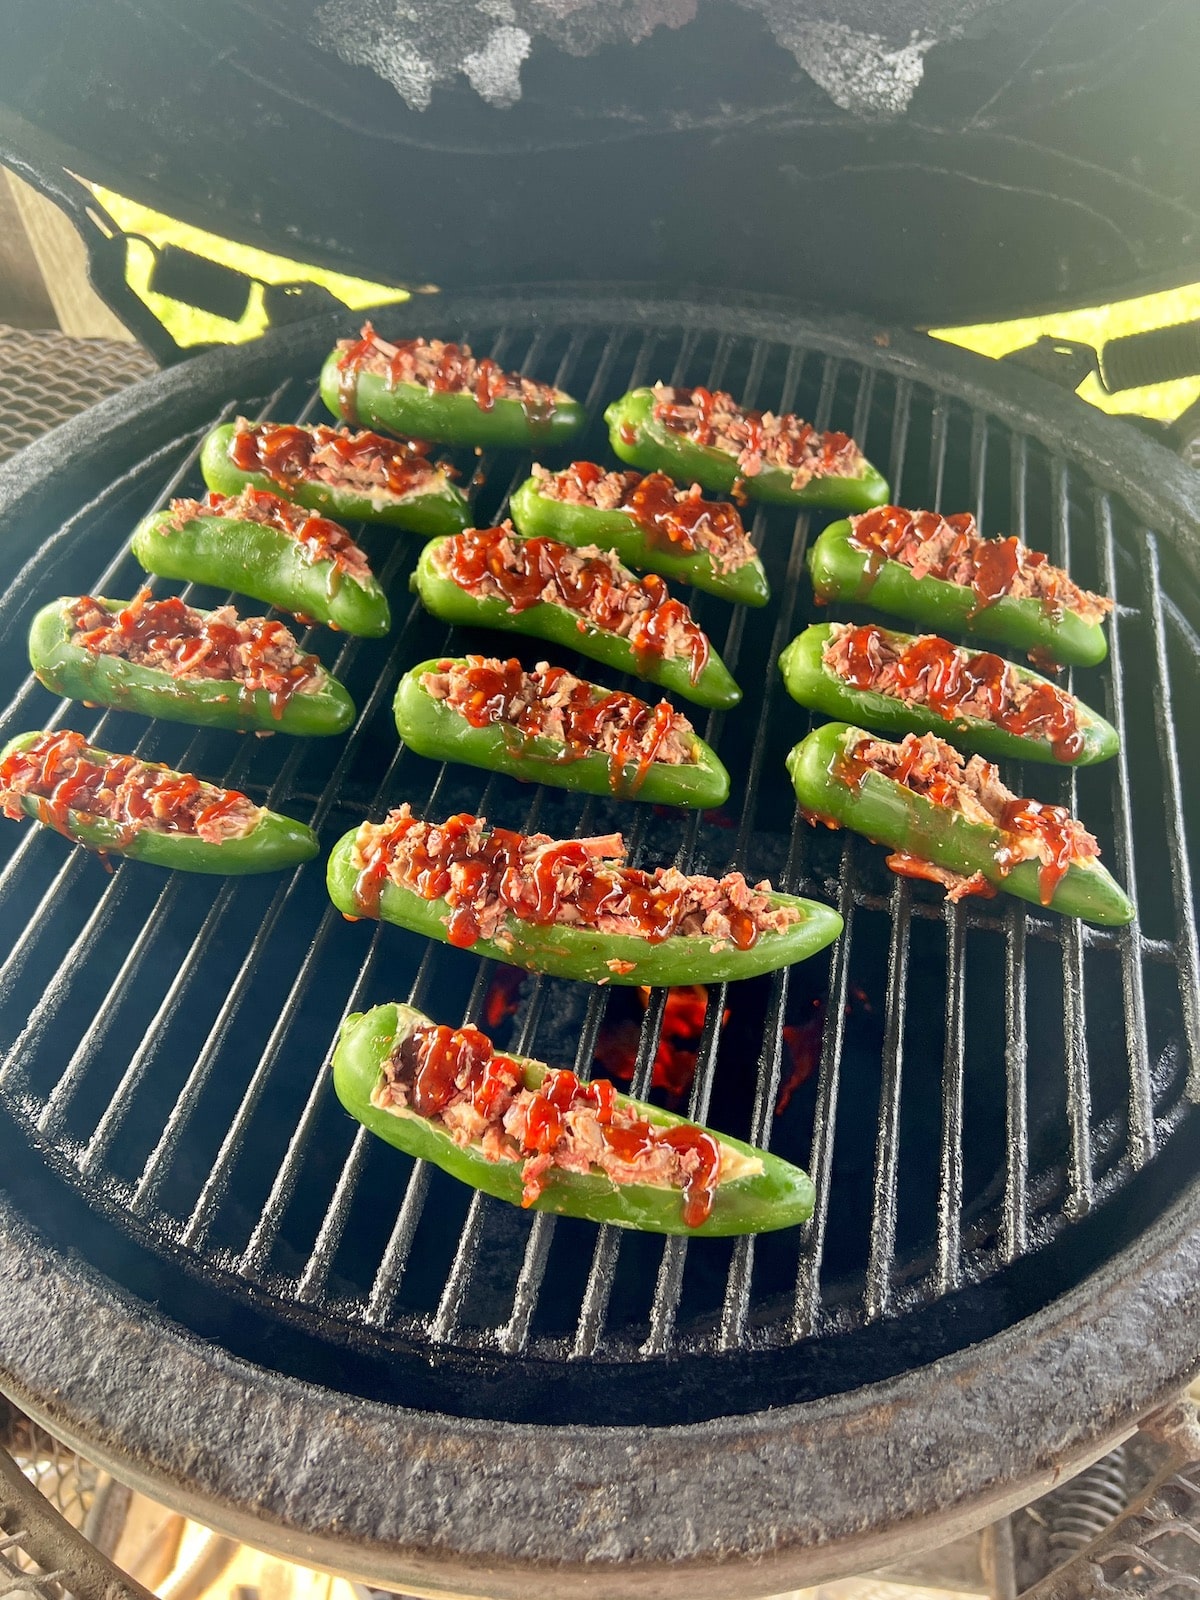 Grill cooking jalapeno poppers.